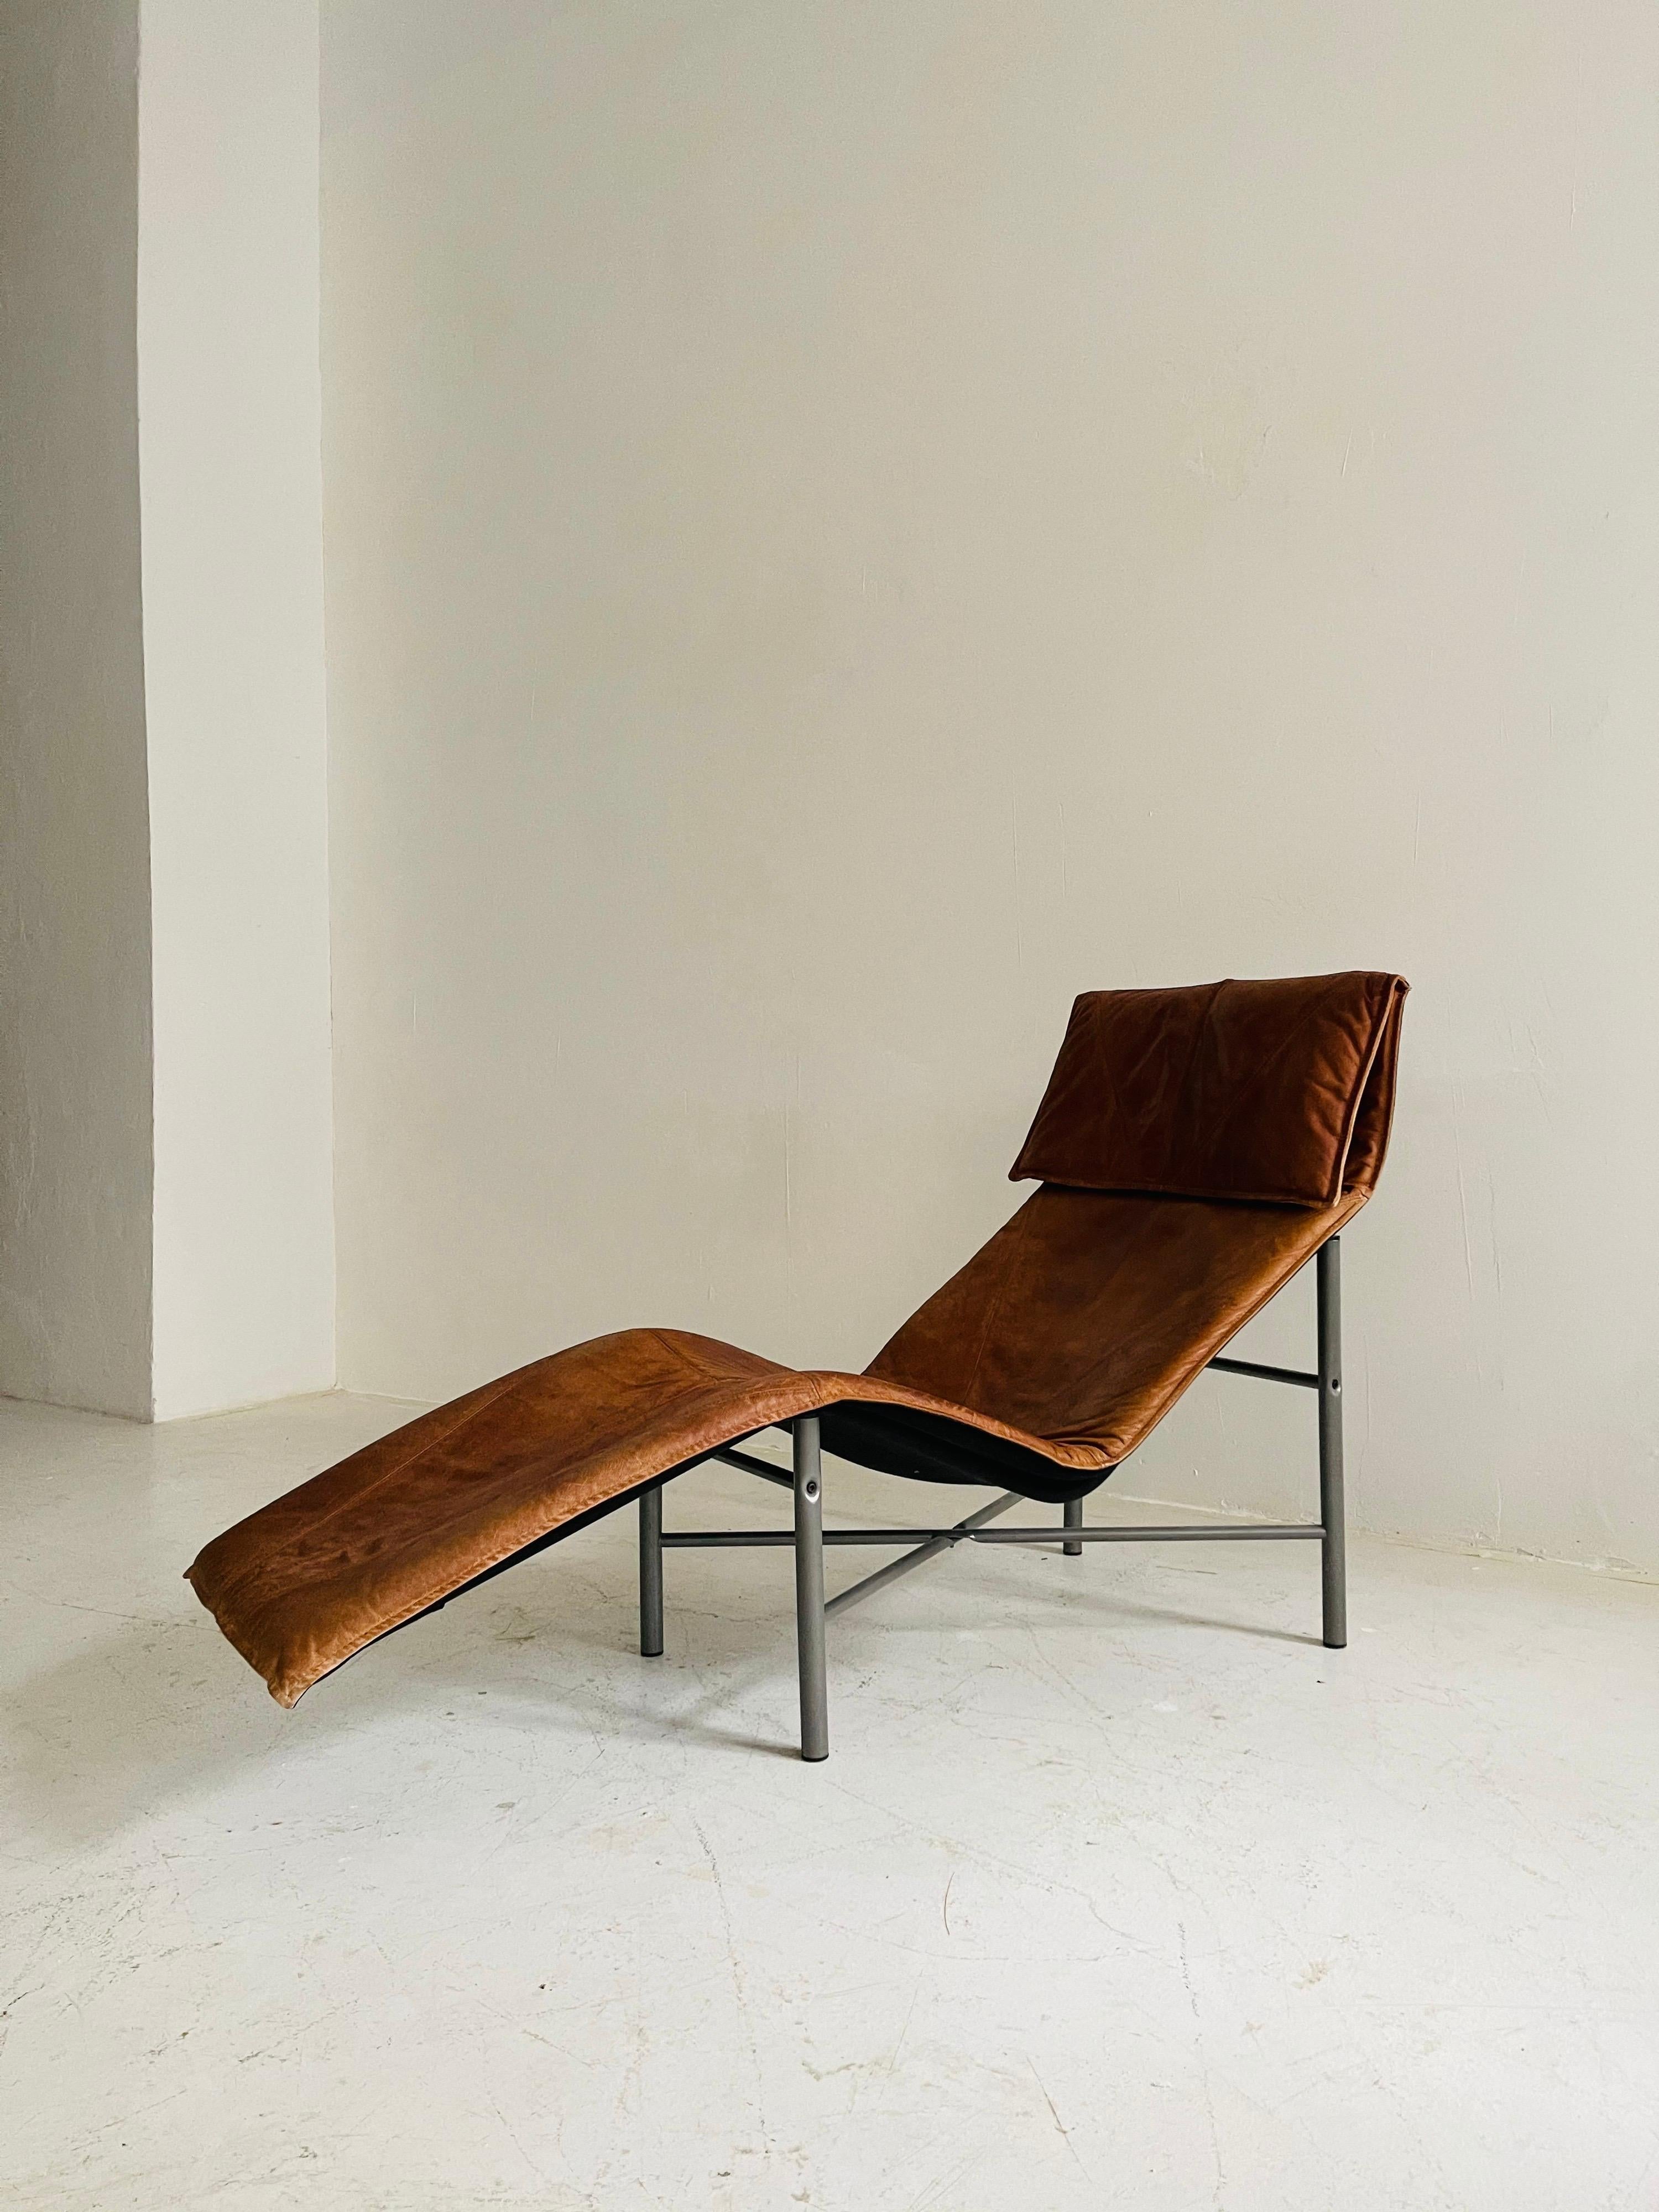 Late 20th Century Patinated Cognac Leather Chaise Longue by Tord Bjorklund, Sweden, 1970 For Sale